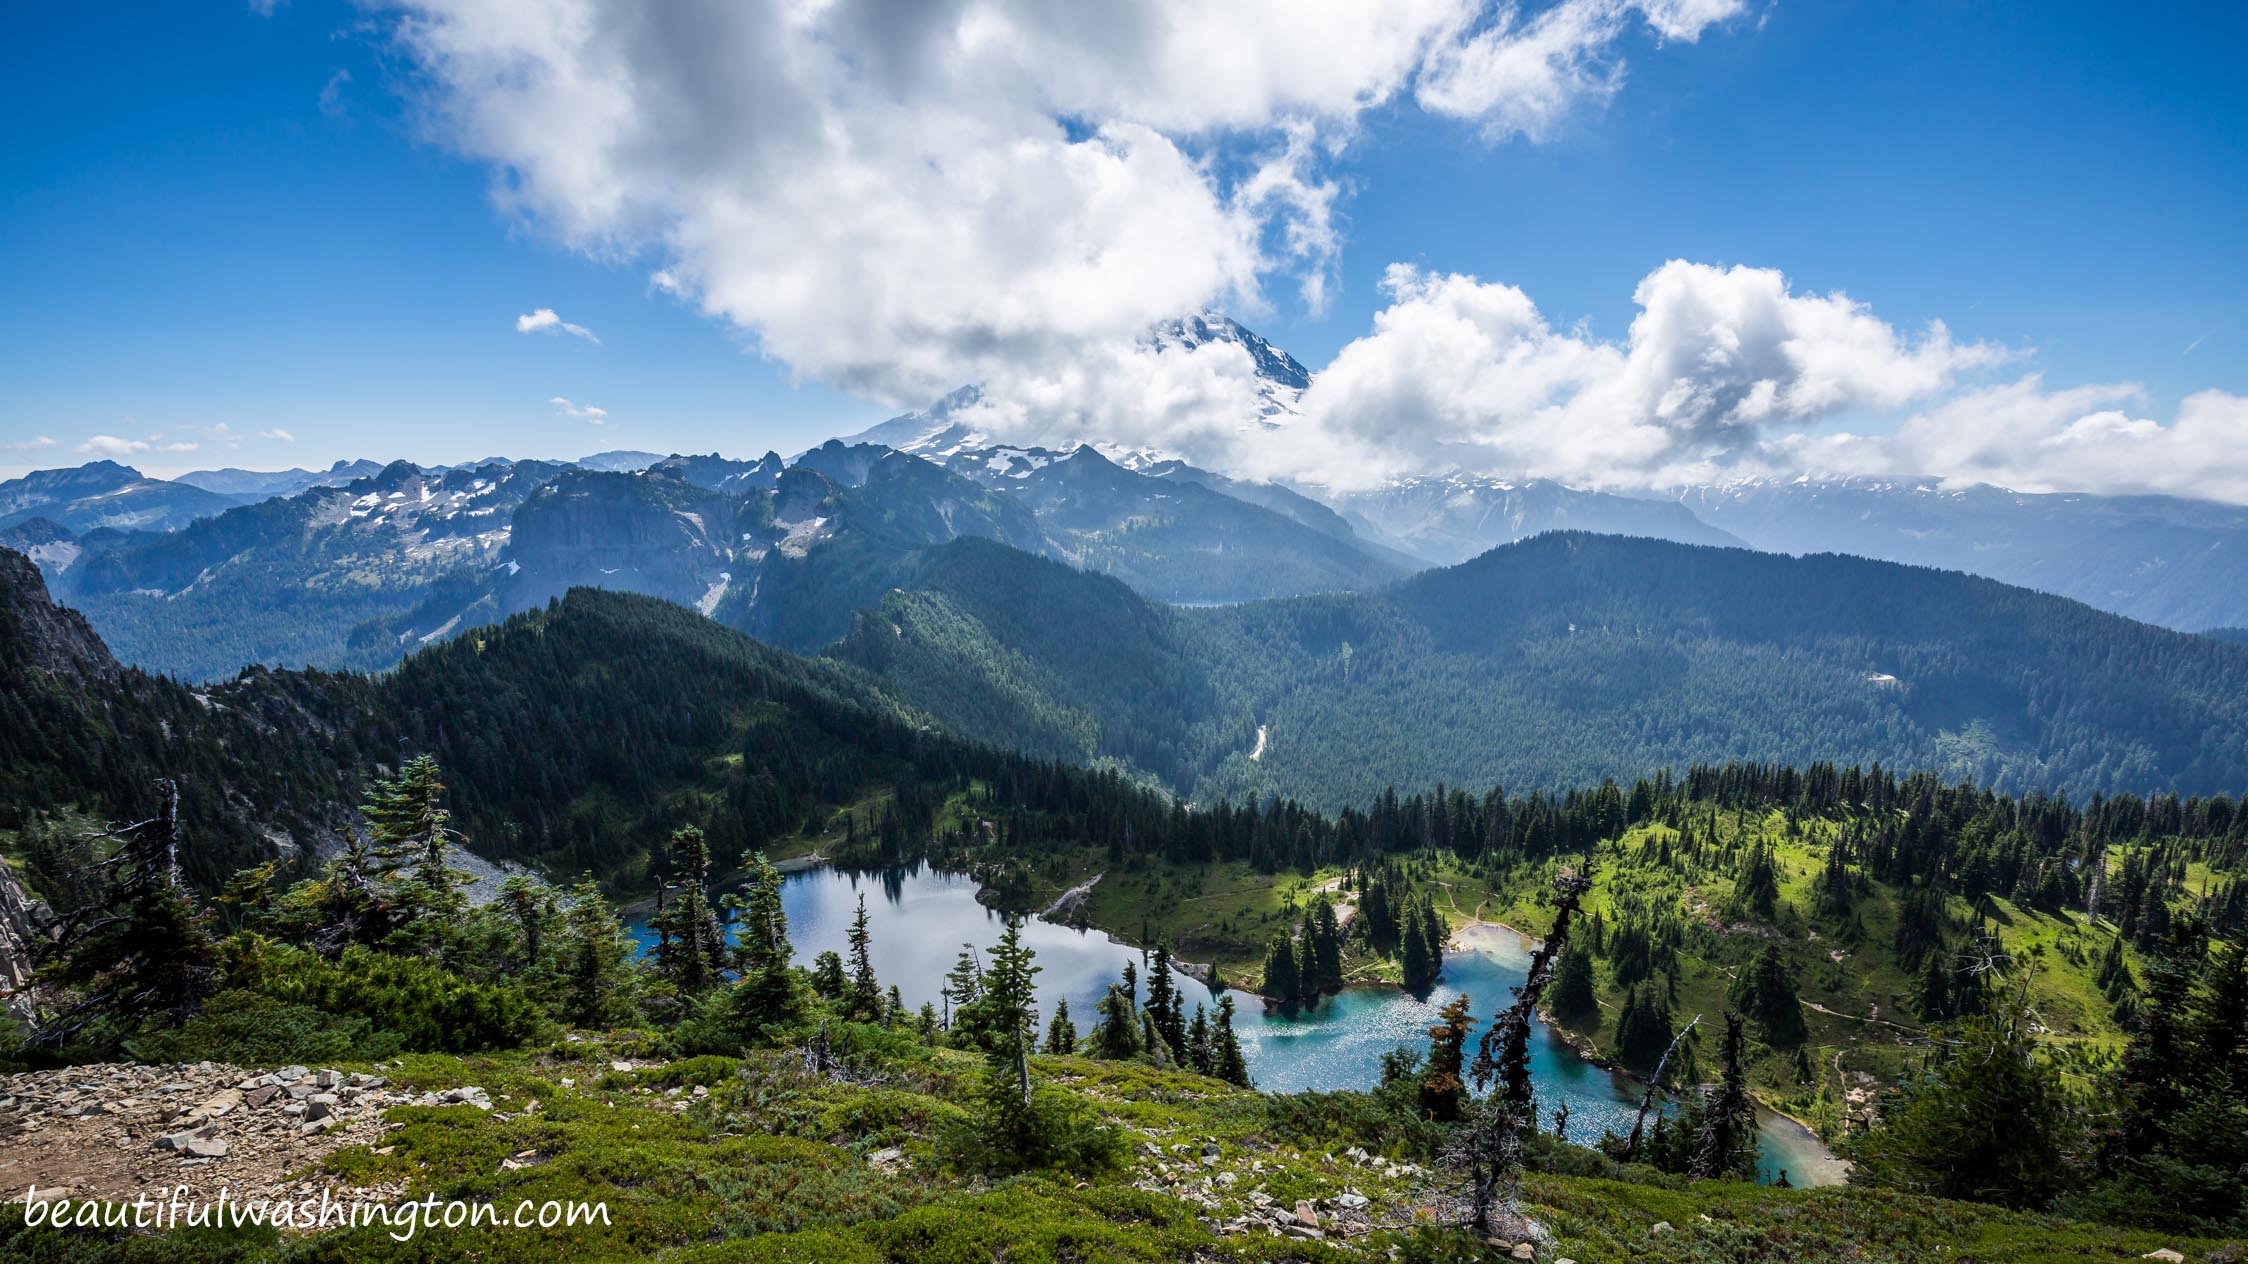 Photo from Mt. Rainier, Carbon River and Mowich Lake Area, Tolmie Peak